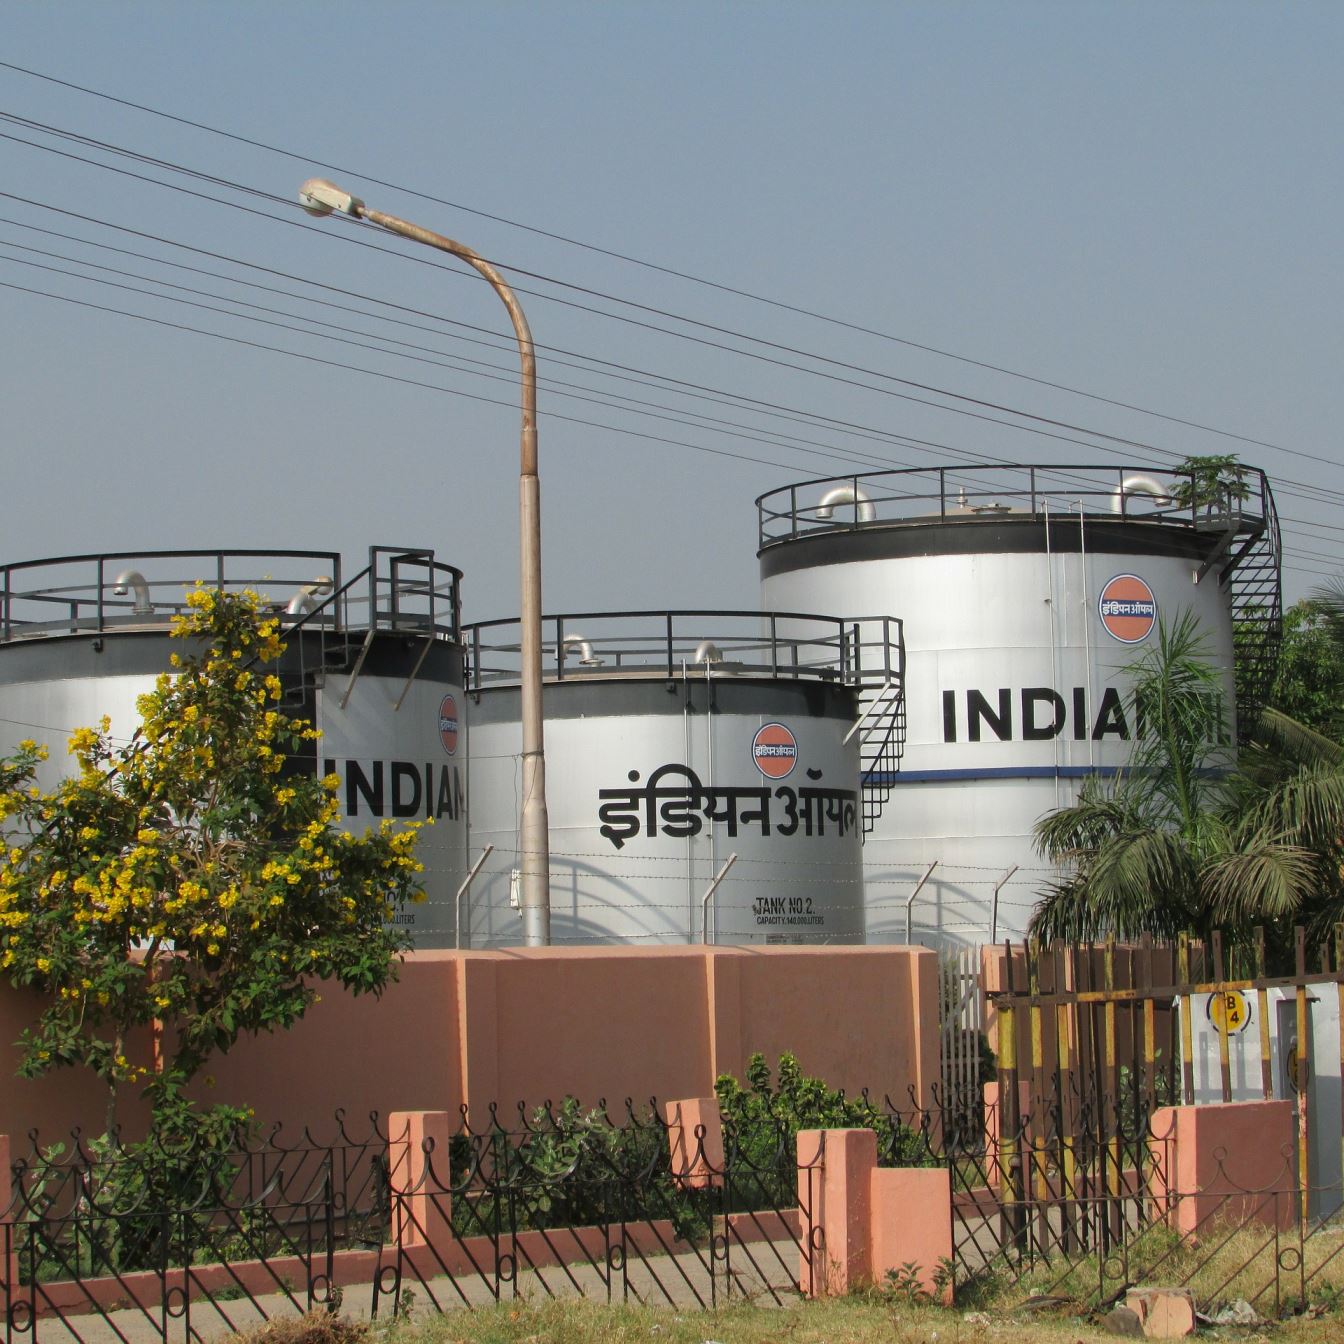 The Crude Indian Story – An Economy In TurmOIL?